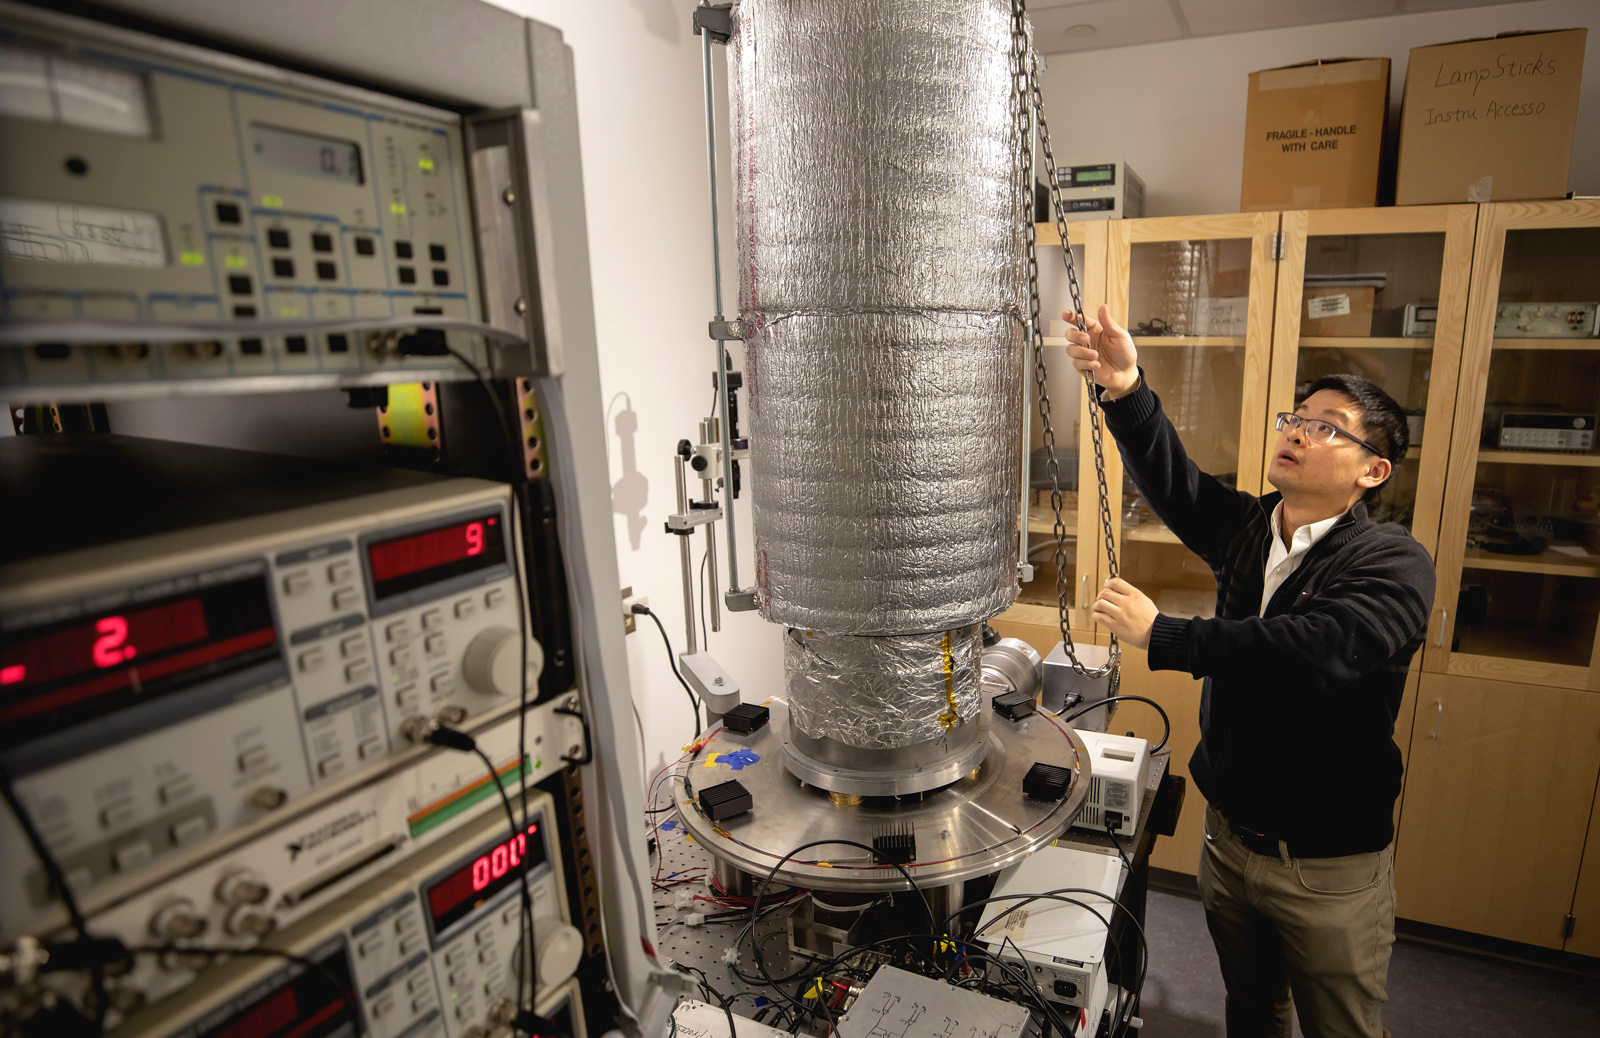 Linxiao Zhu, ME Research Fellow, unveils a device that enables cooling via heat transfer in the GG Brown Building on North Campus of the University of Michigan in Ann Arbor, MI on February 5, 2019. Photo: Joseph Xu